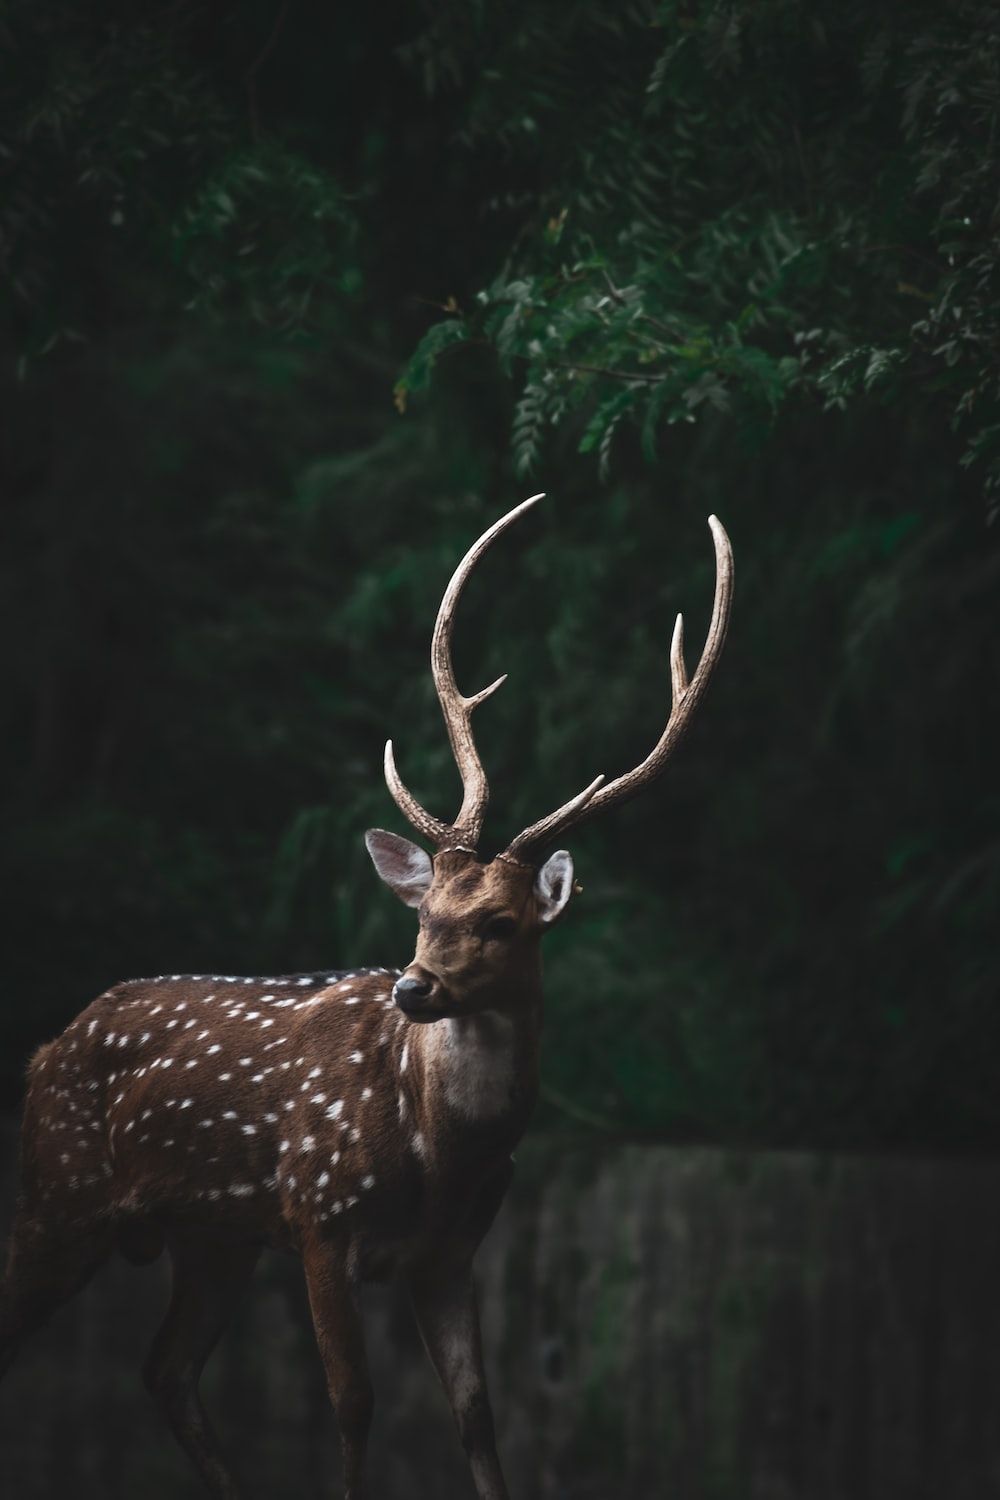 A deer with antlers standing in front of a tree. - Deer